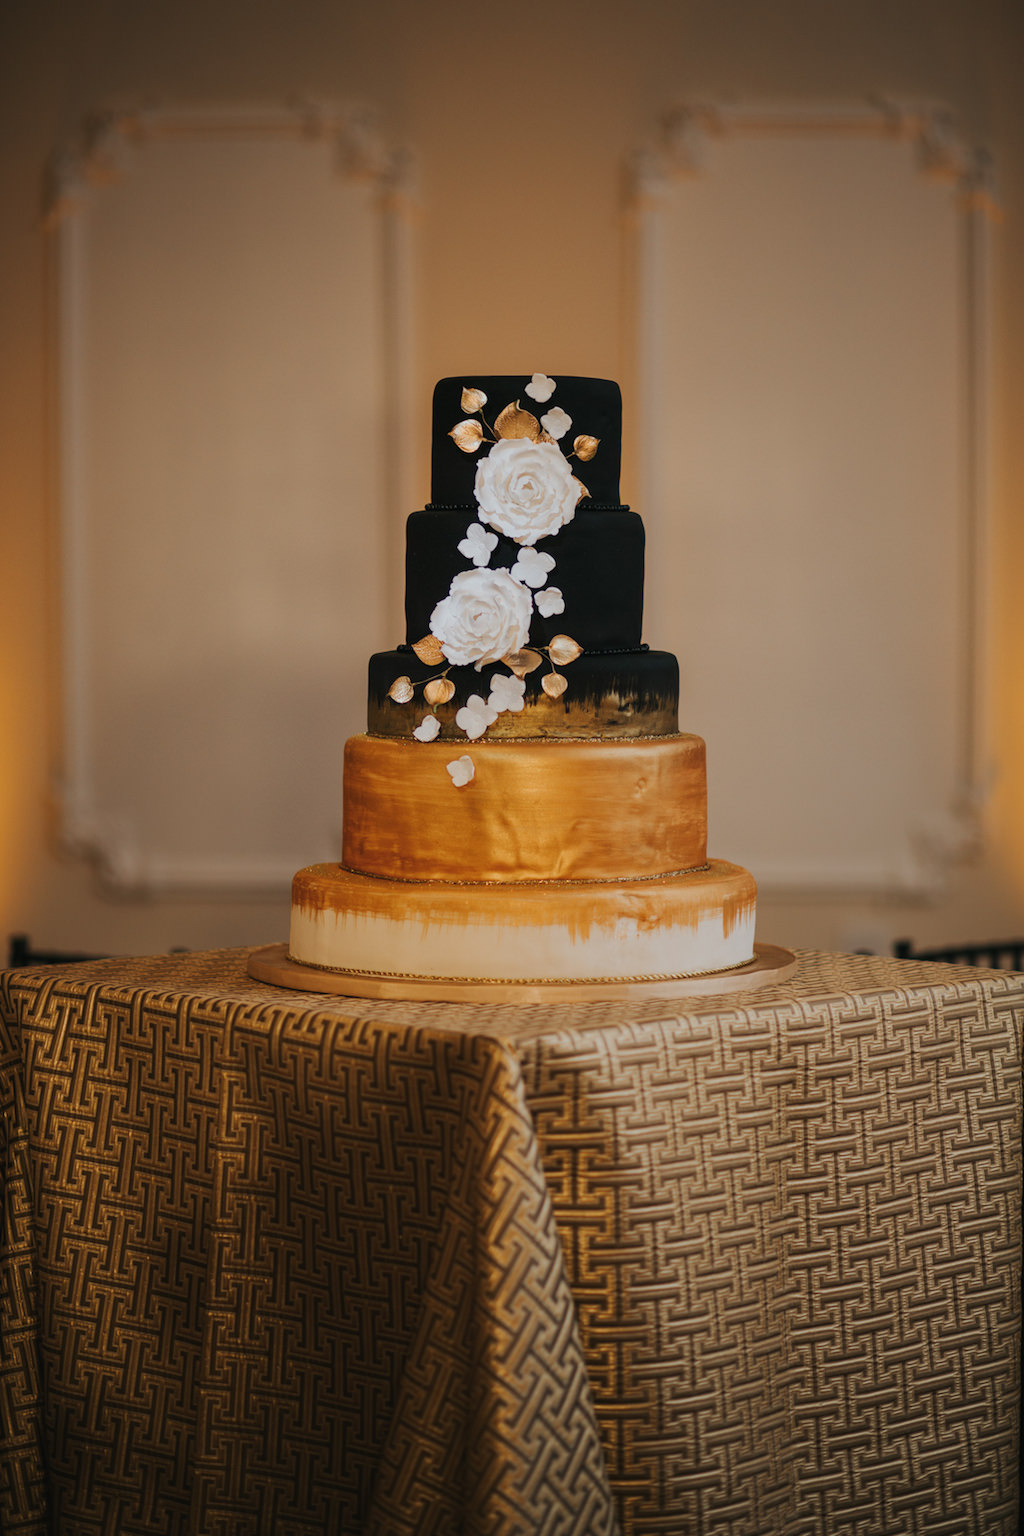 Sophisticated Black, White and Gold Five Tier Round Wedding Cake with Black to Gold Ombre and White and Gold Florals on Gold Cake Stand on Geometric Gold Linen | Tampa Bay Wedding Cake Bakery Alessi Bakery | Linen Rental Over The Top Linen Rentals